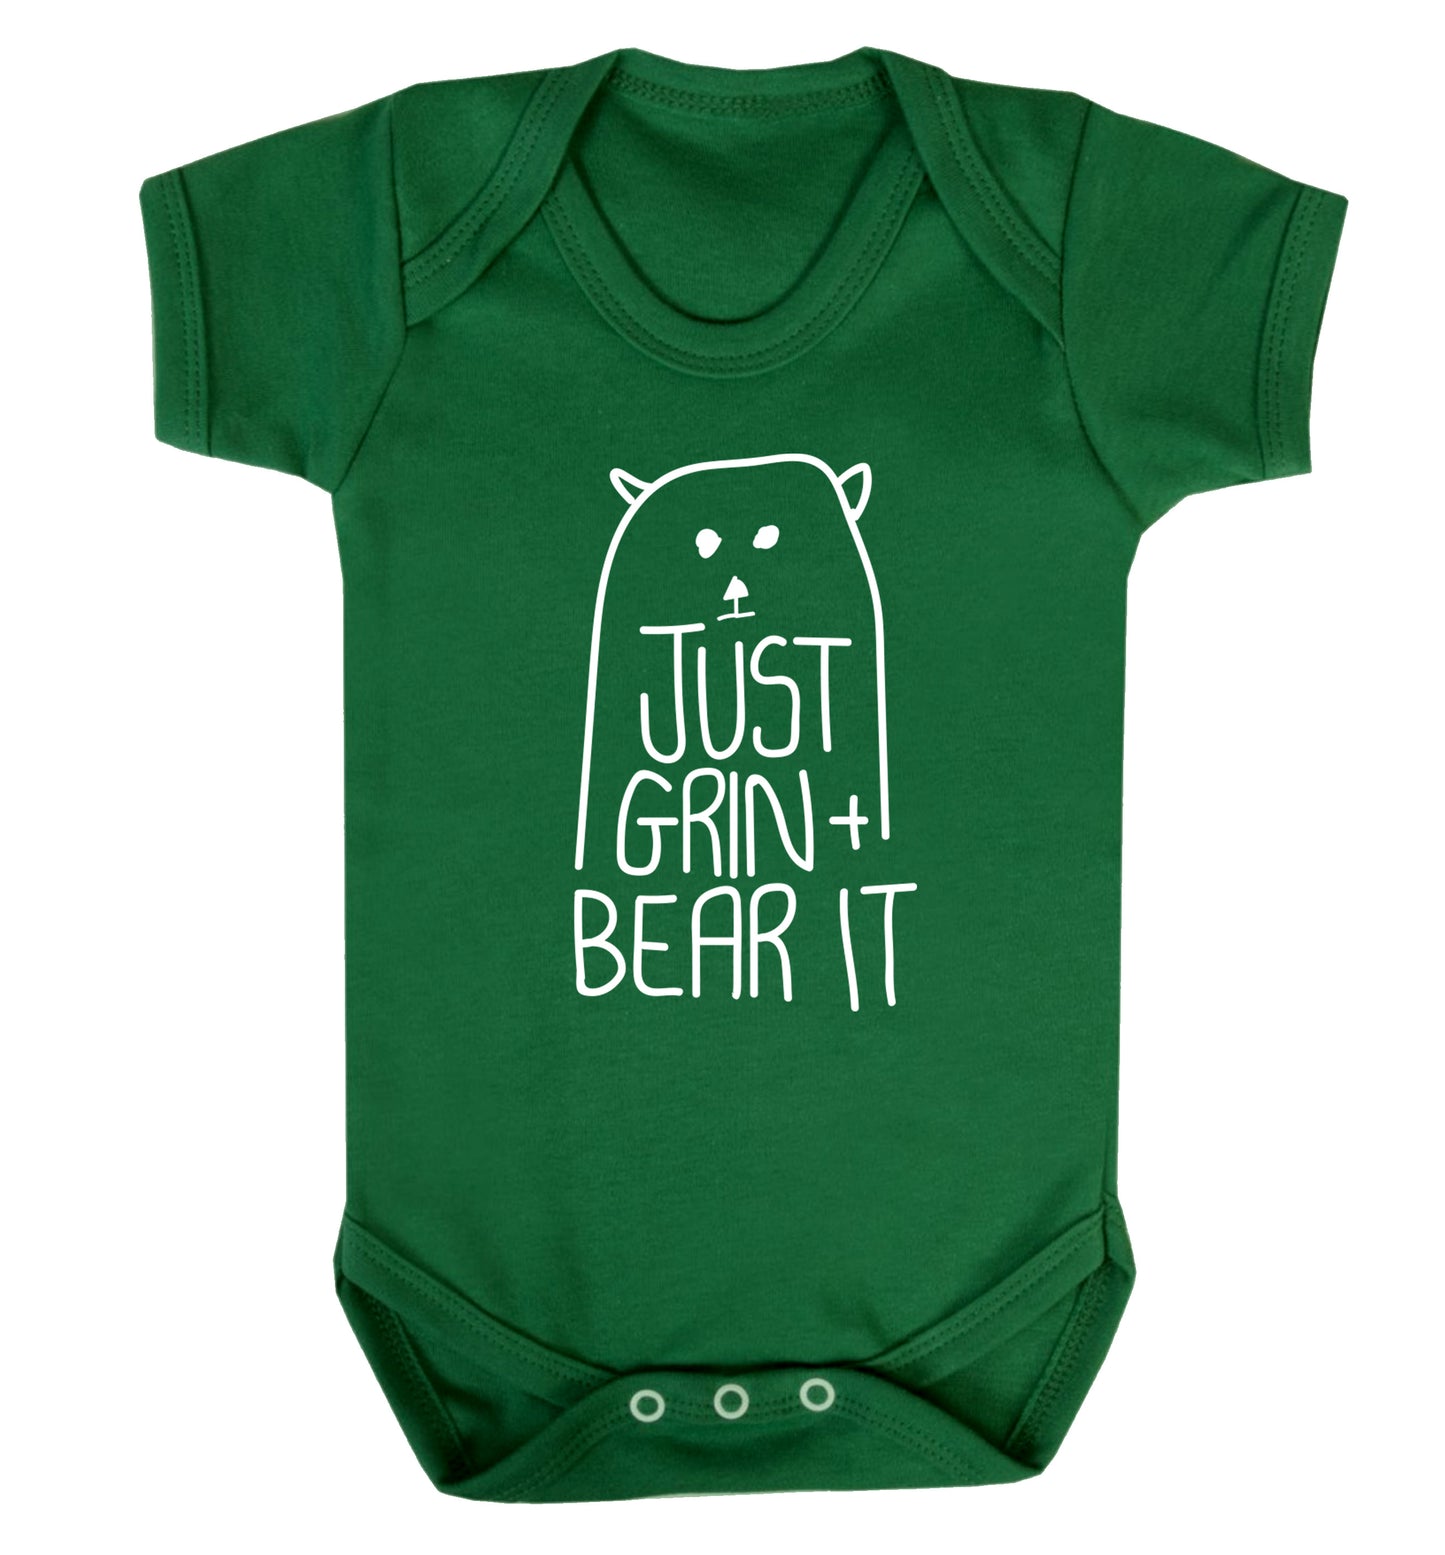 Just grin and bear it Baby Vest green 18-24 months